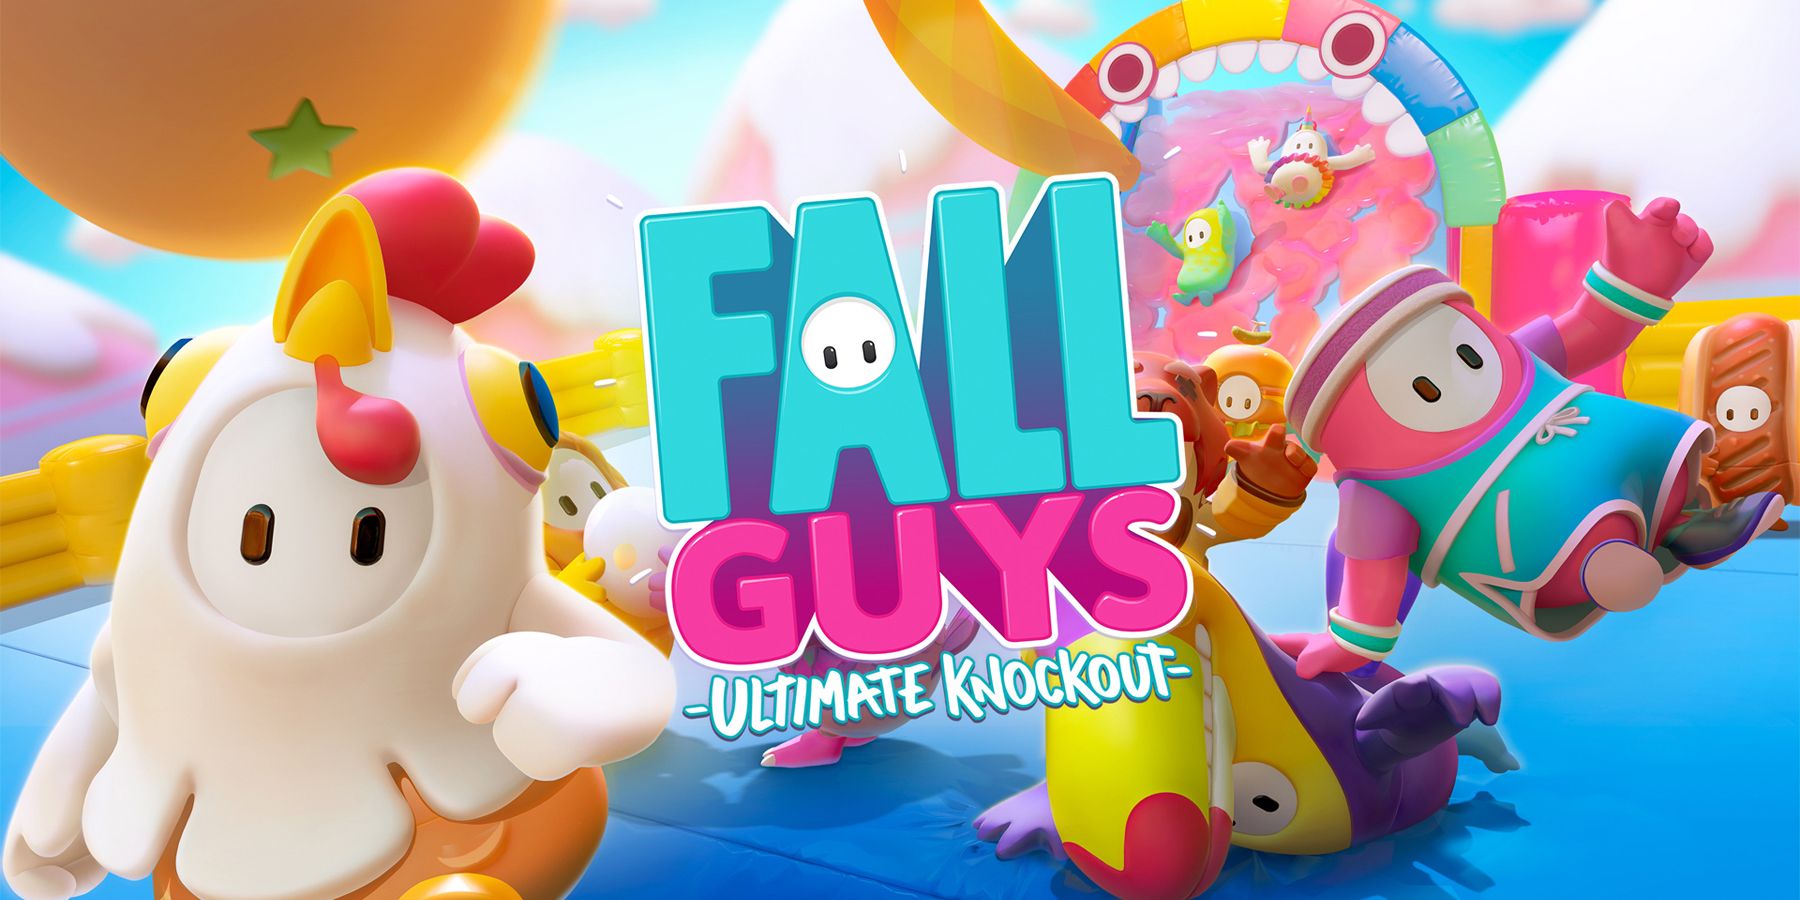 Fall Guys Ultimate Knockout title